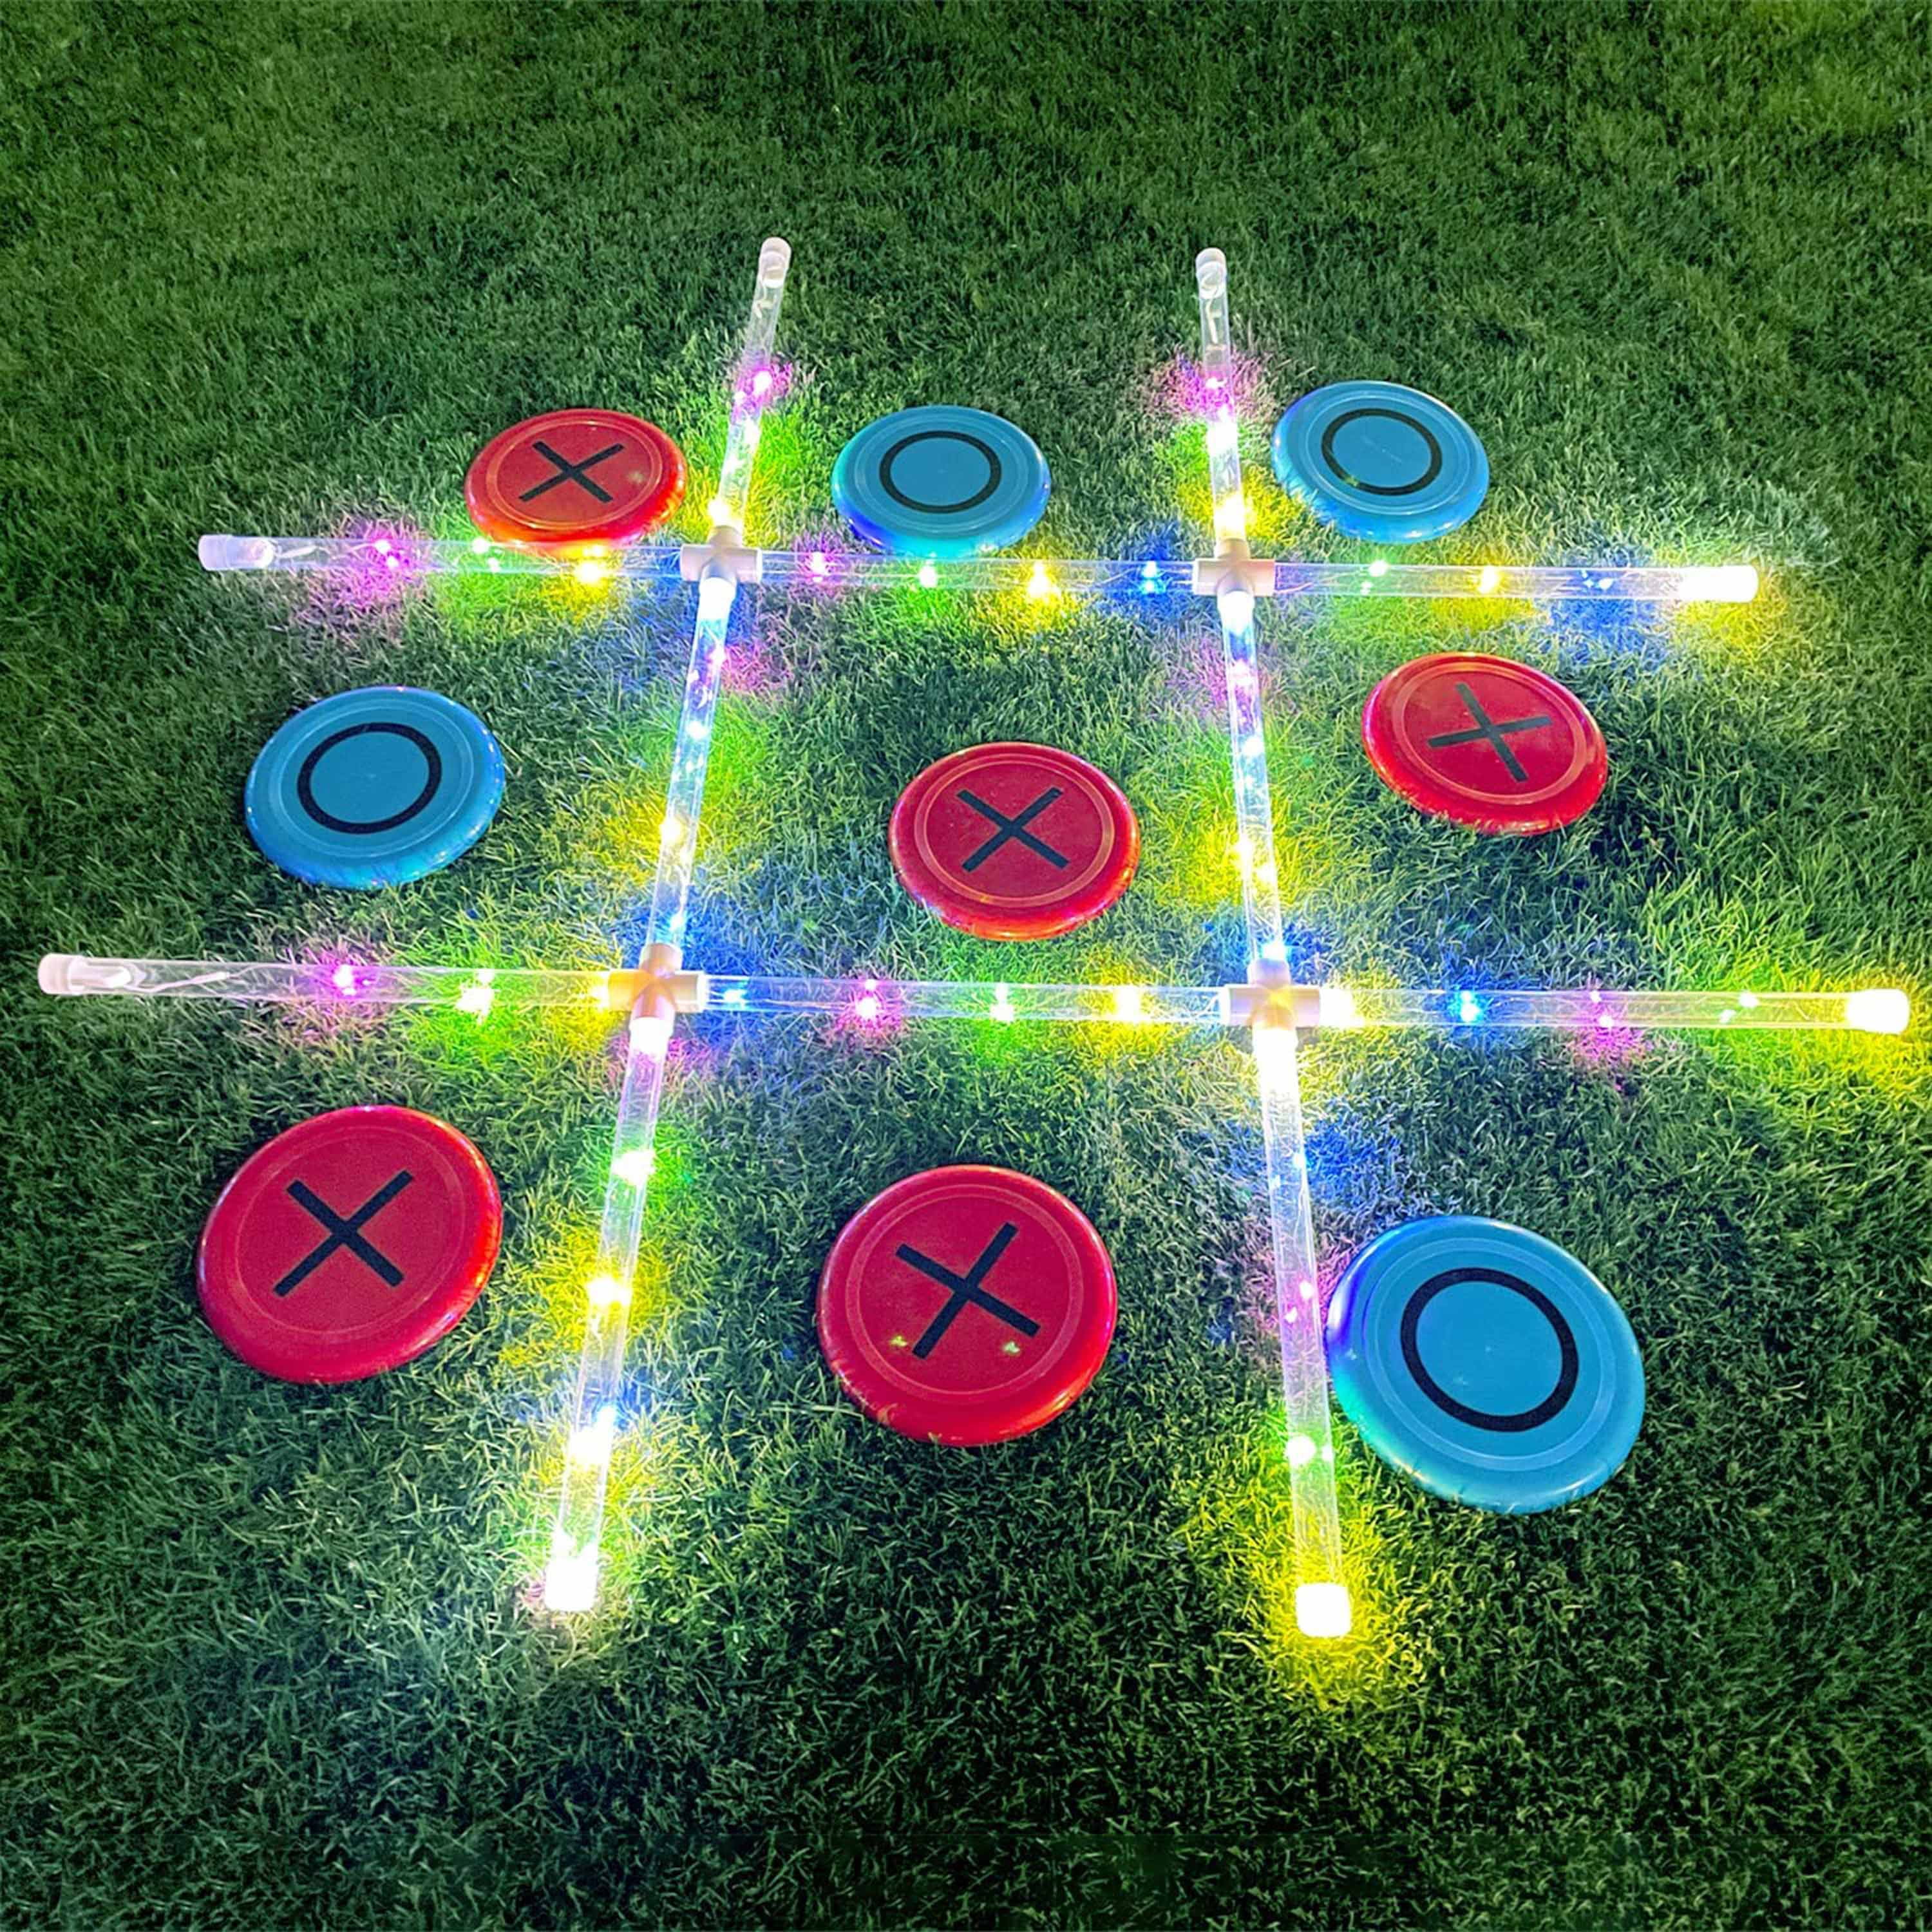 Amazon.com : Poen 3 Sets Tic Tac Toe Game Ring Toss Games and 2 in 1 Limbo  Game Yard Games for Adults Kids Glow in Dark Giant Yard Games with LED Light